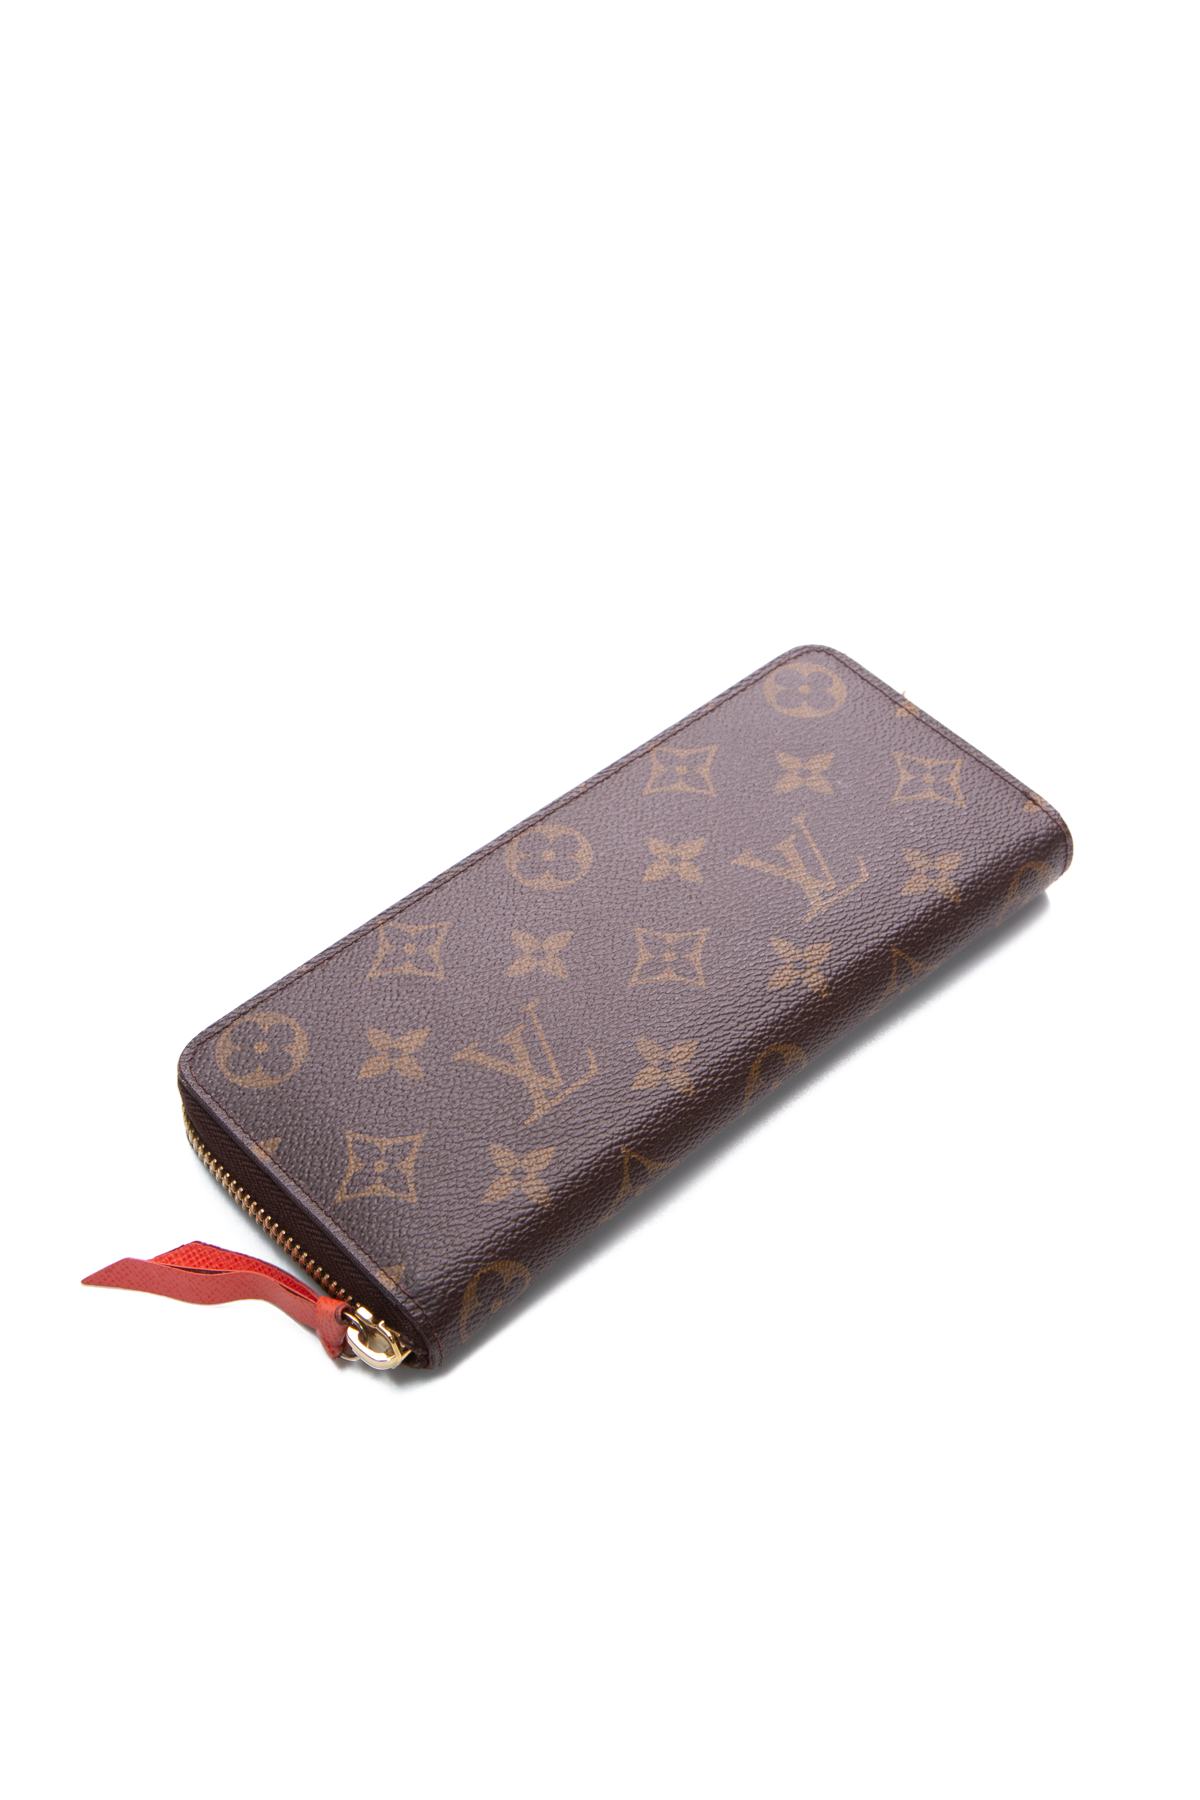 Louis Vuitton Clemence Wallet - Couture USA